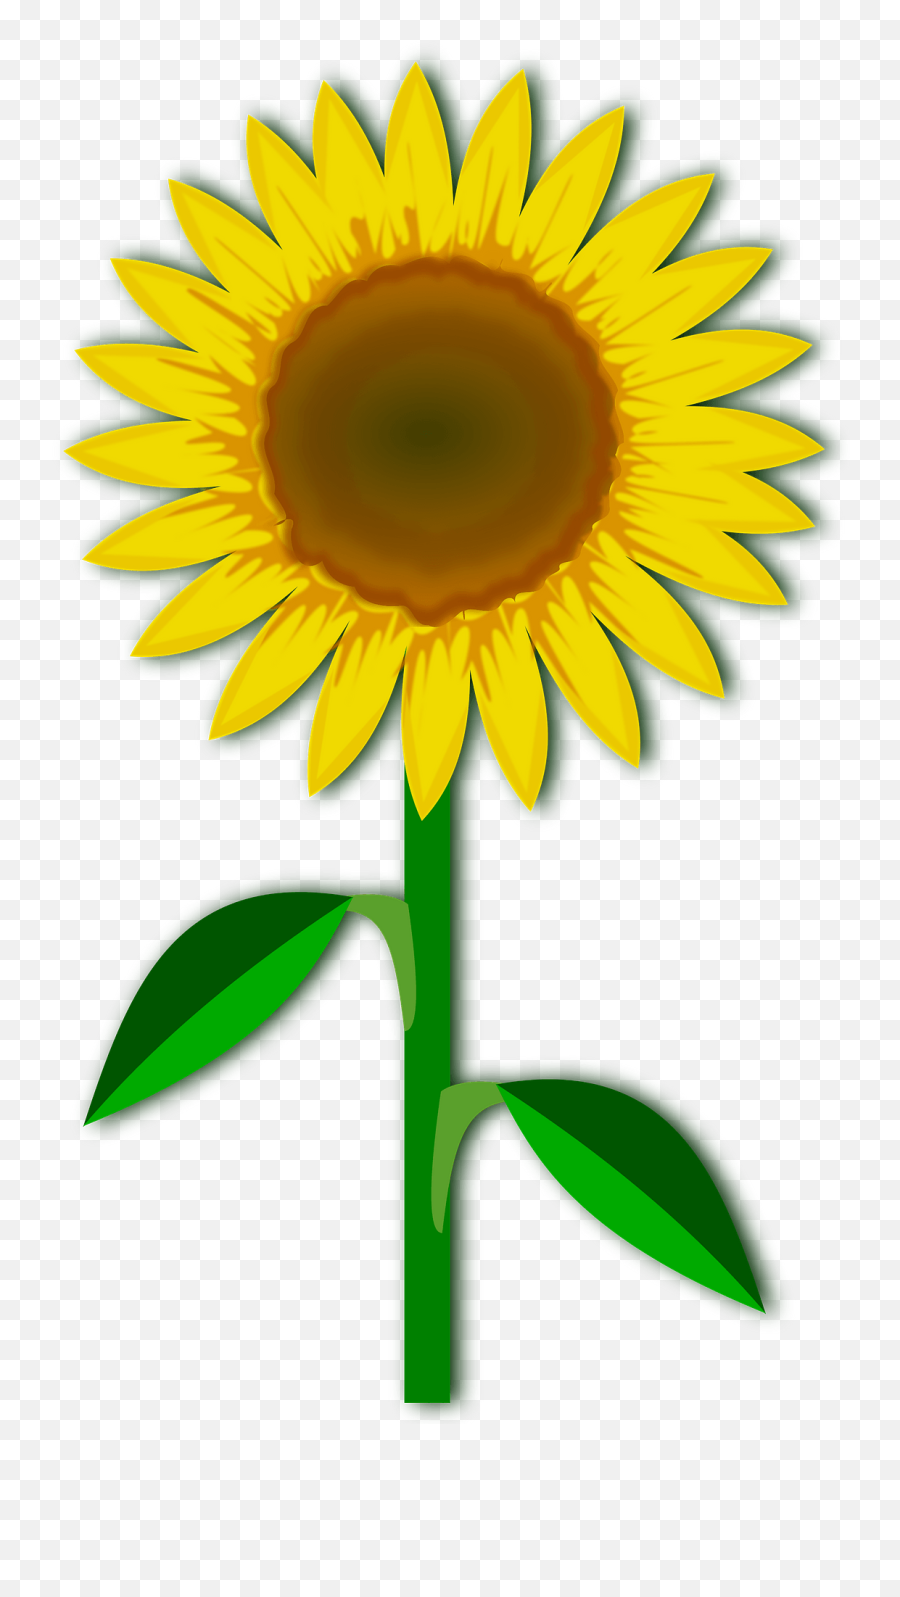 Clip Art Flor Flora - Free Vector Graphic On Pixabay Yellow Flower With Stem Clipart Emoji,Nature Clipart